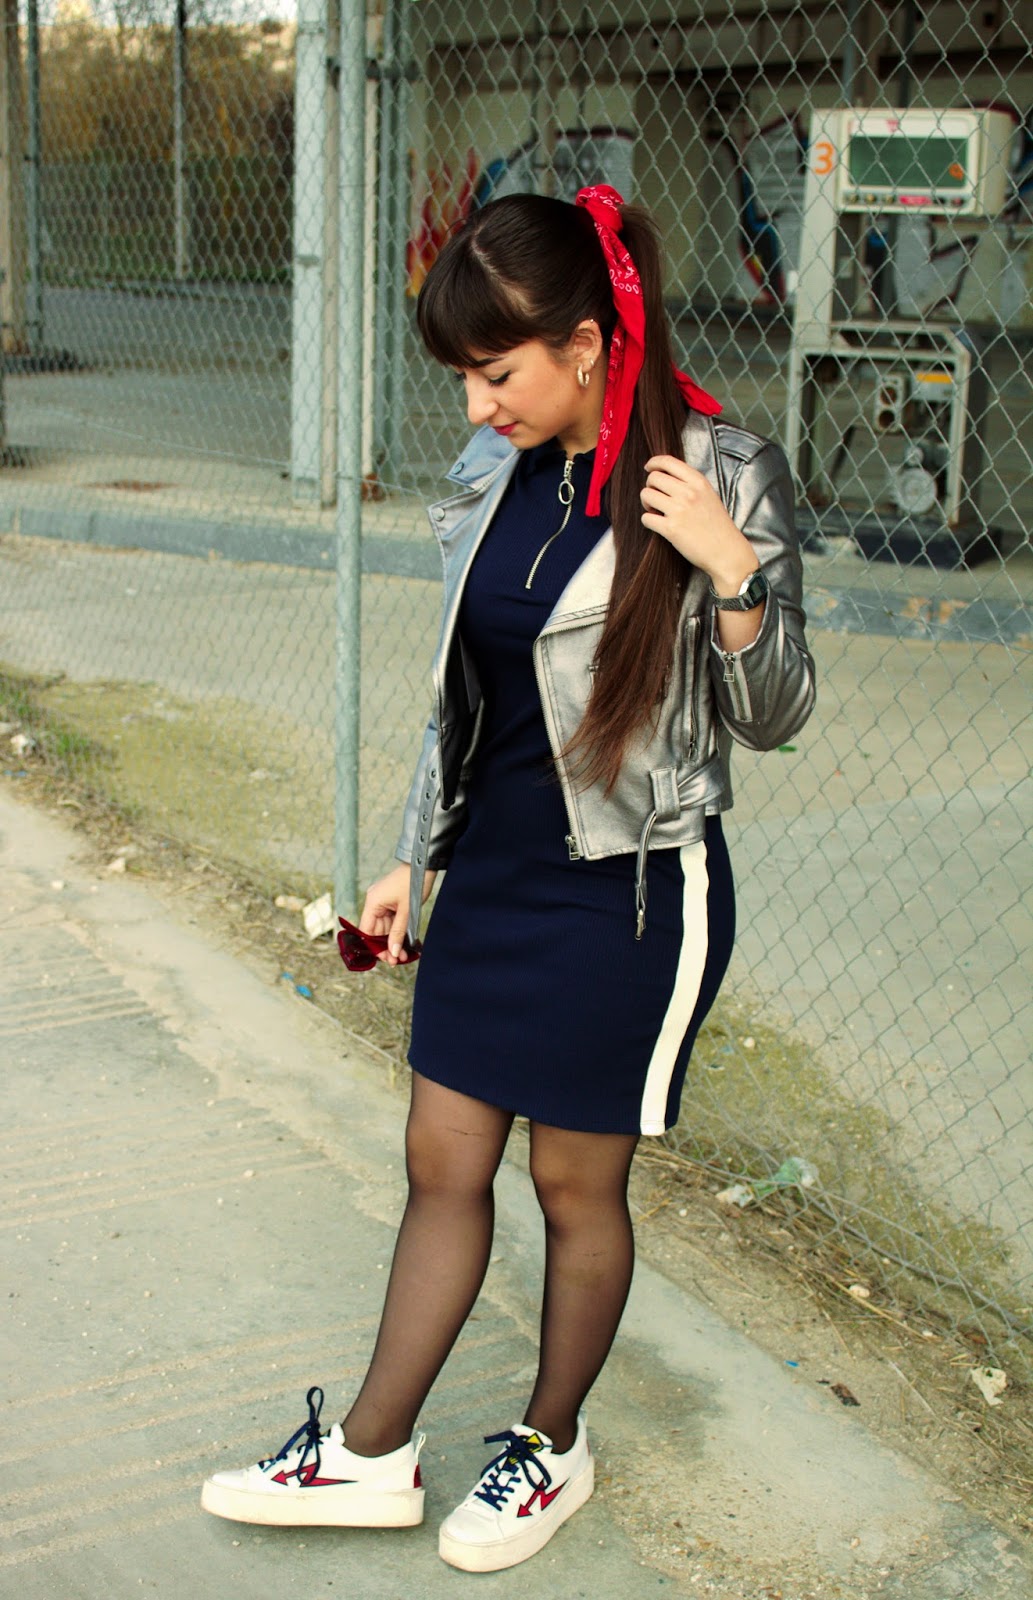 Summer style Navy Pin-up Girl - Fashionmylegs : The tights and